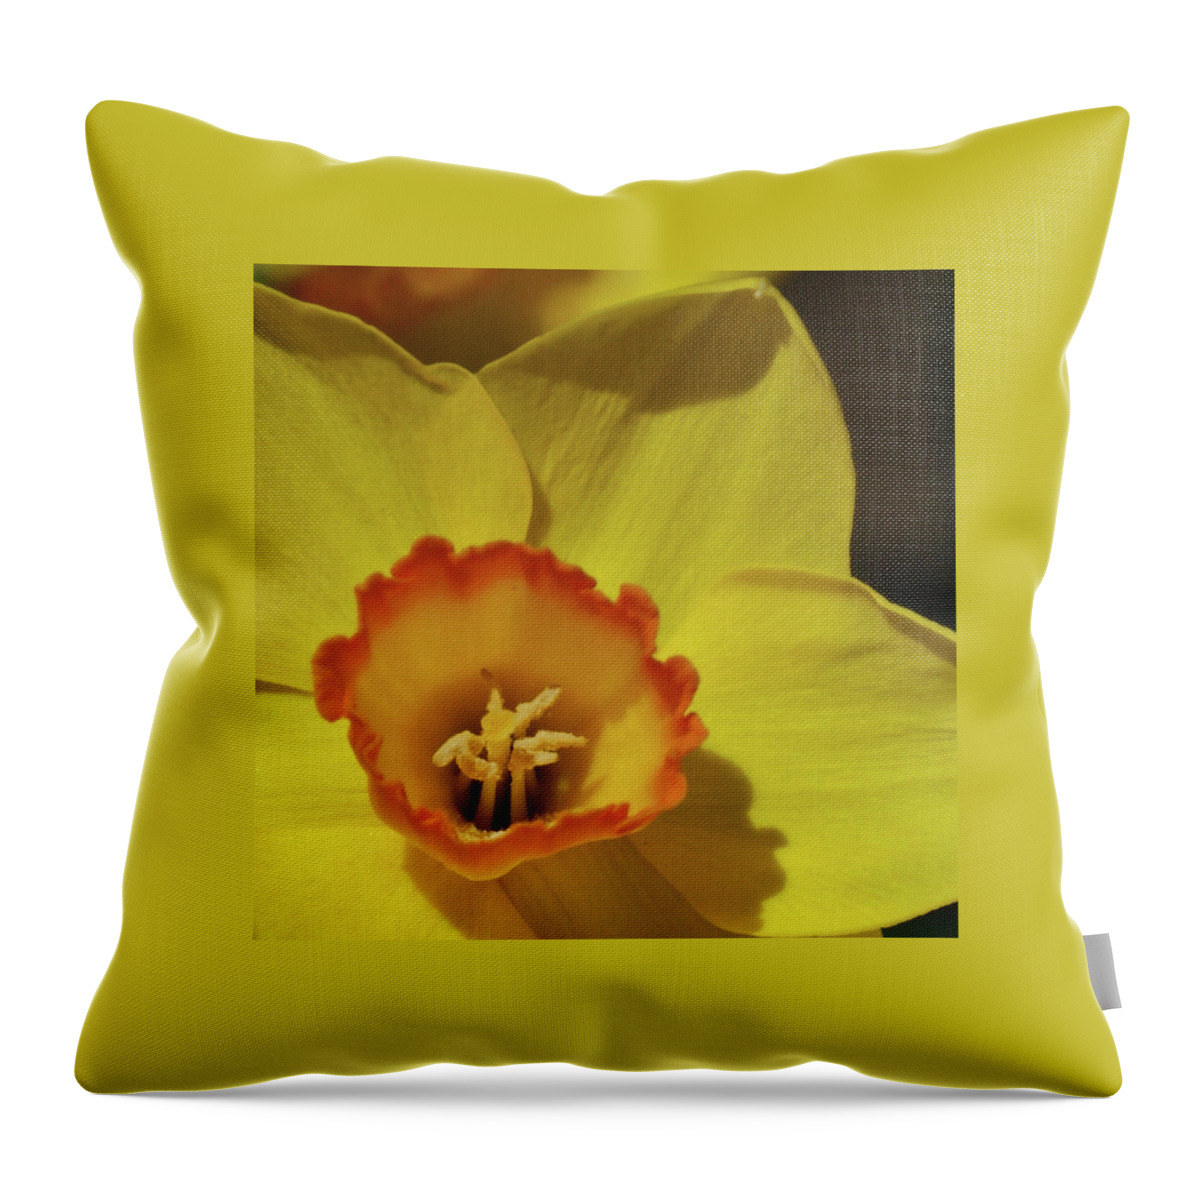 Daffodil Throw Pillow featuring the photograph Daffodil by Ernest Echols